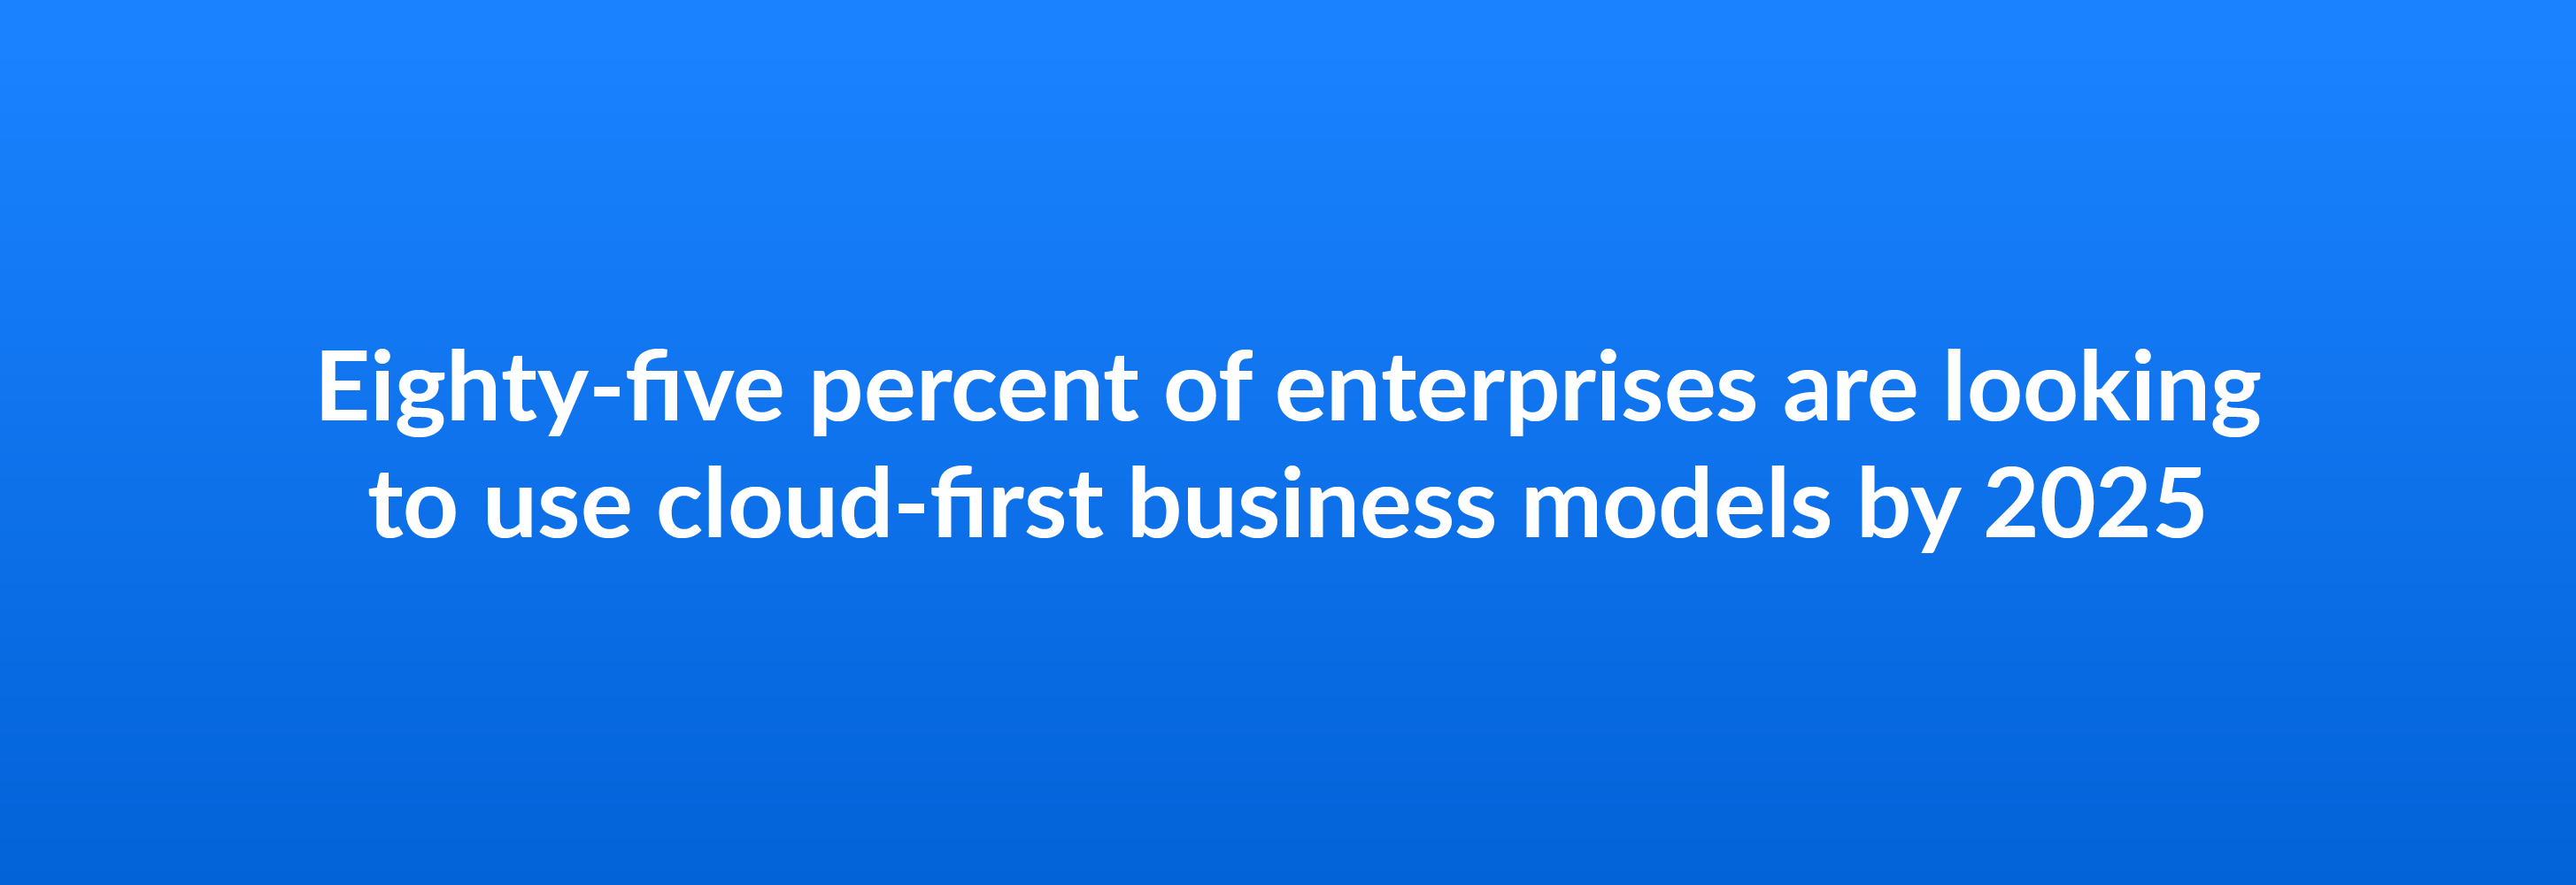 Eighty-five percent of enterprises are looking to use cloud-first business models by 2025